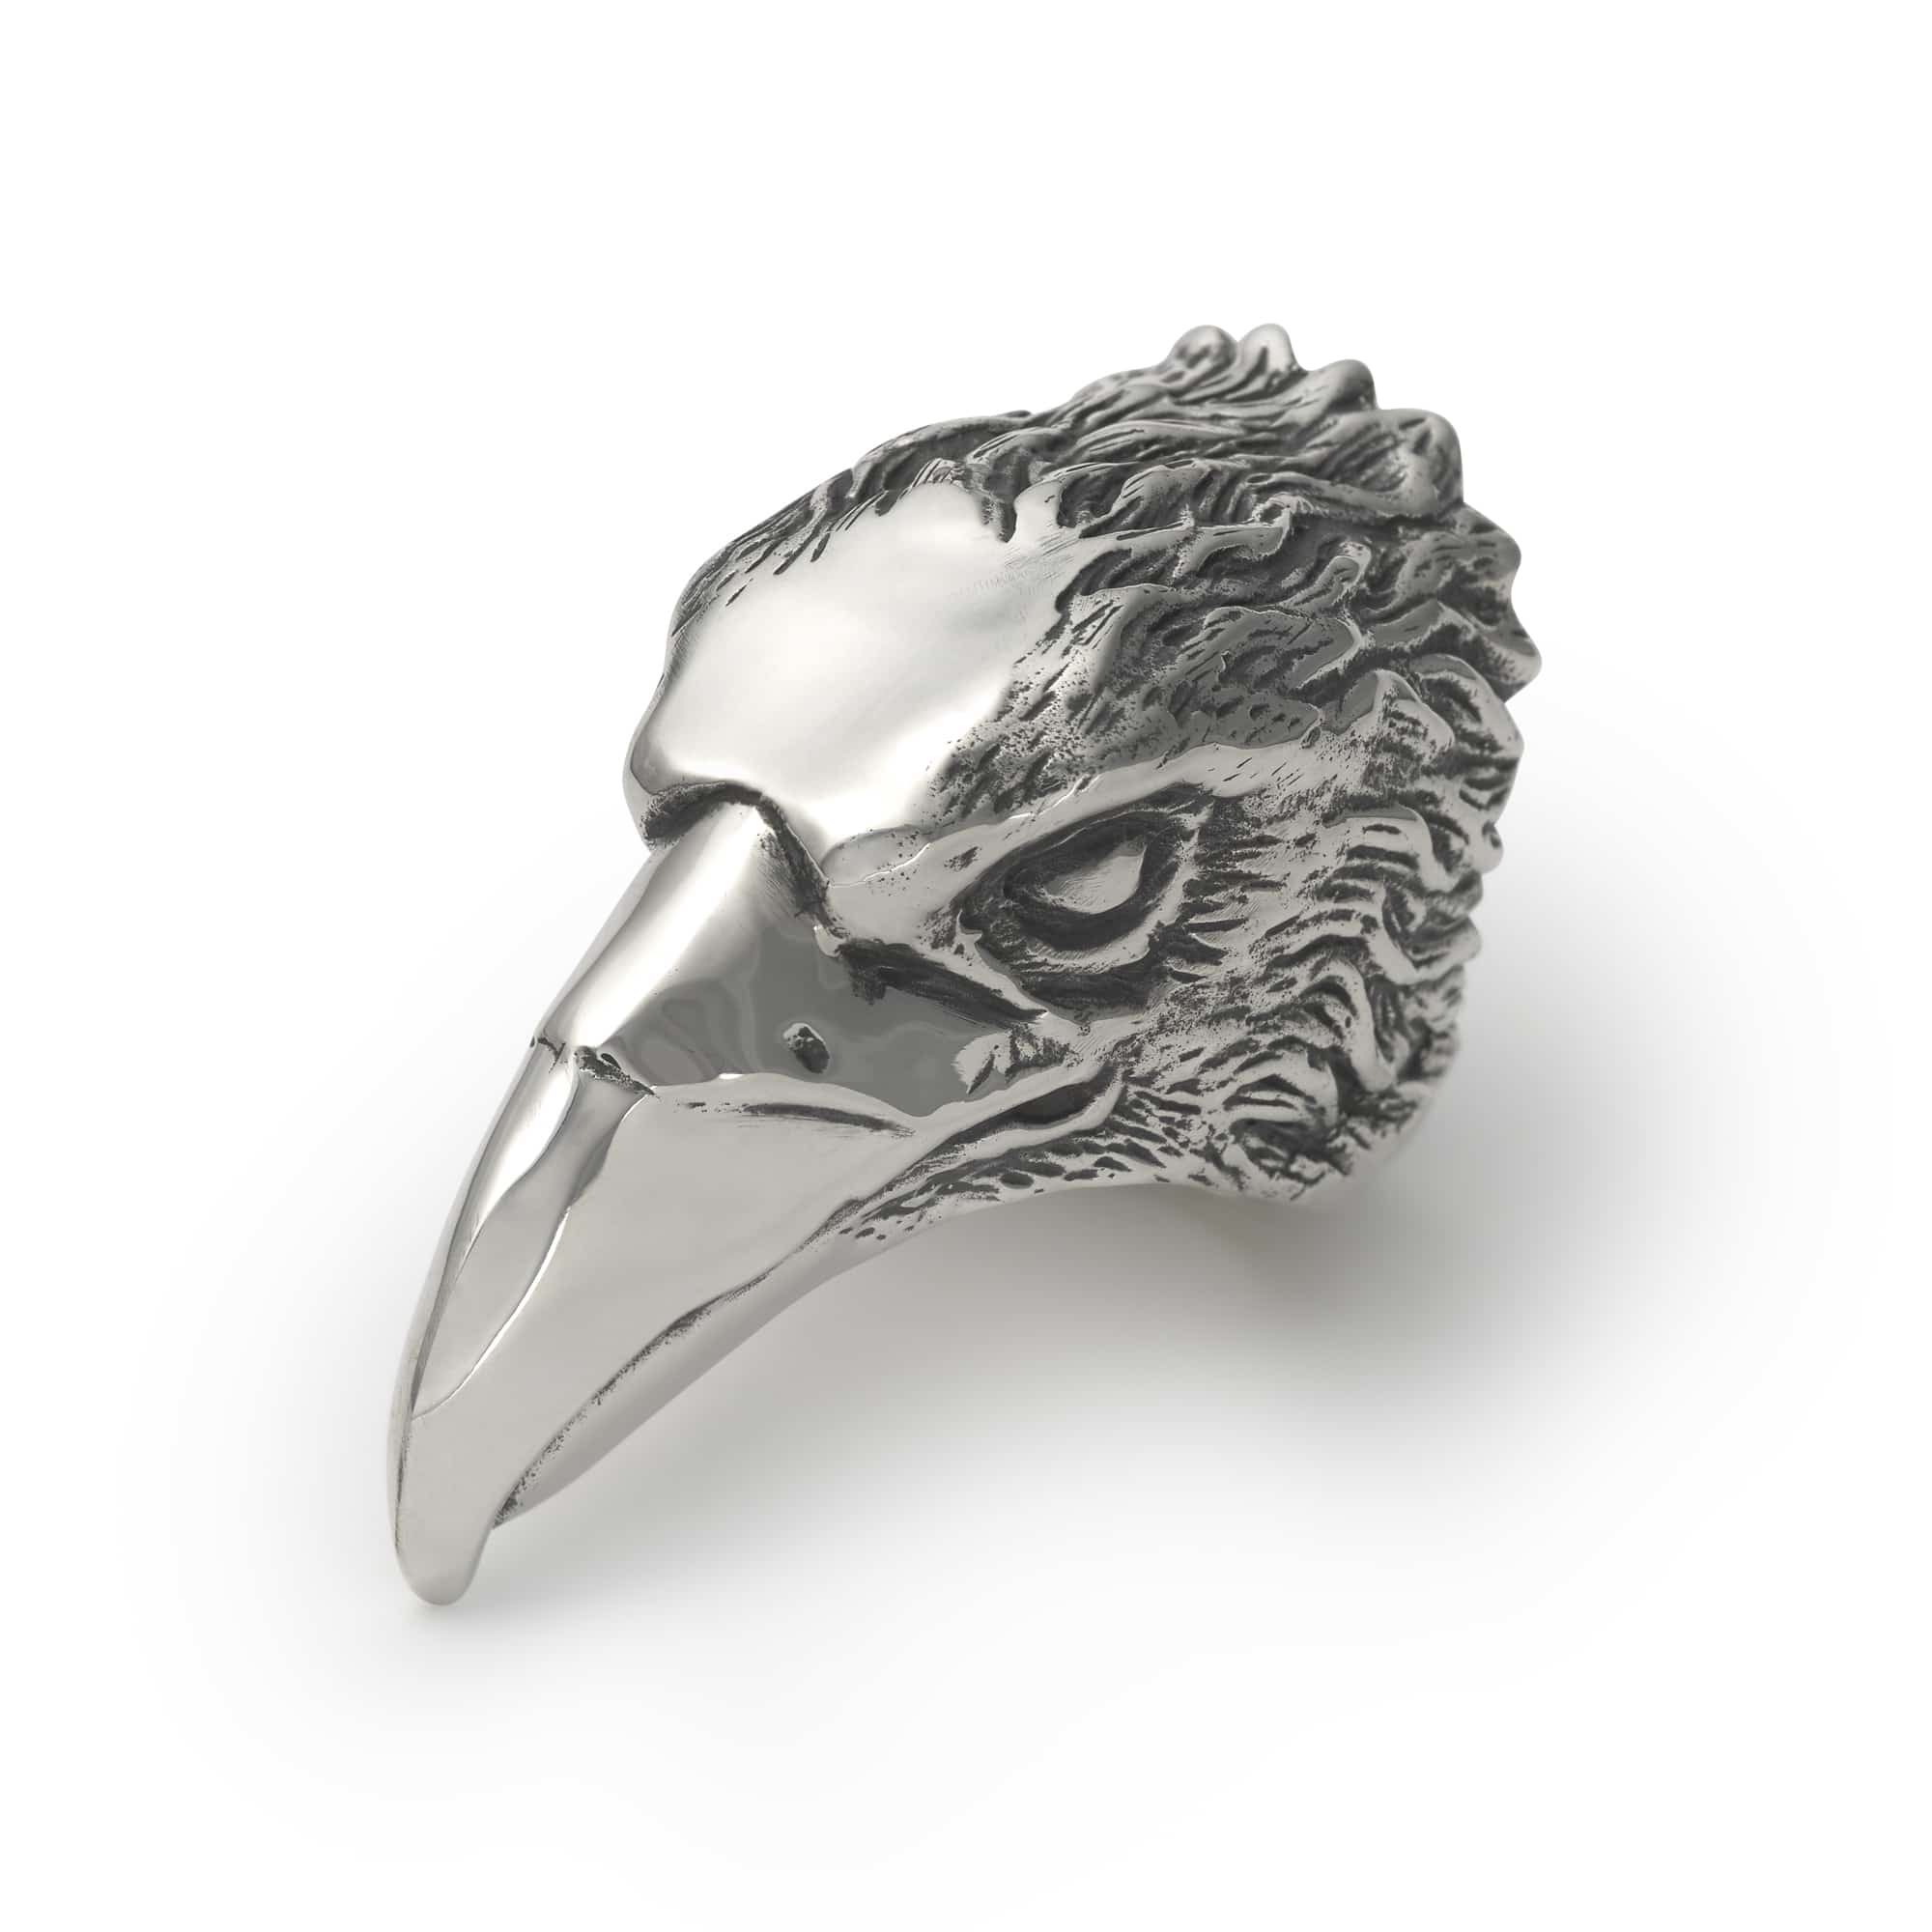 Large Eagle Head Ring - The Great Frog